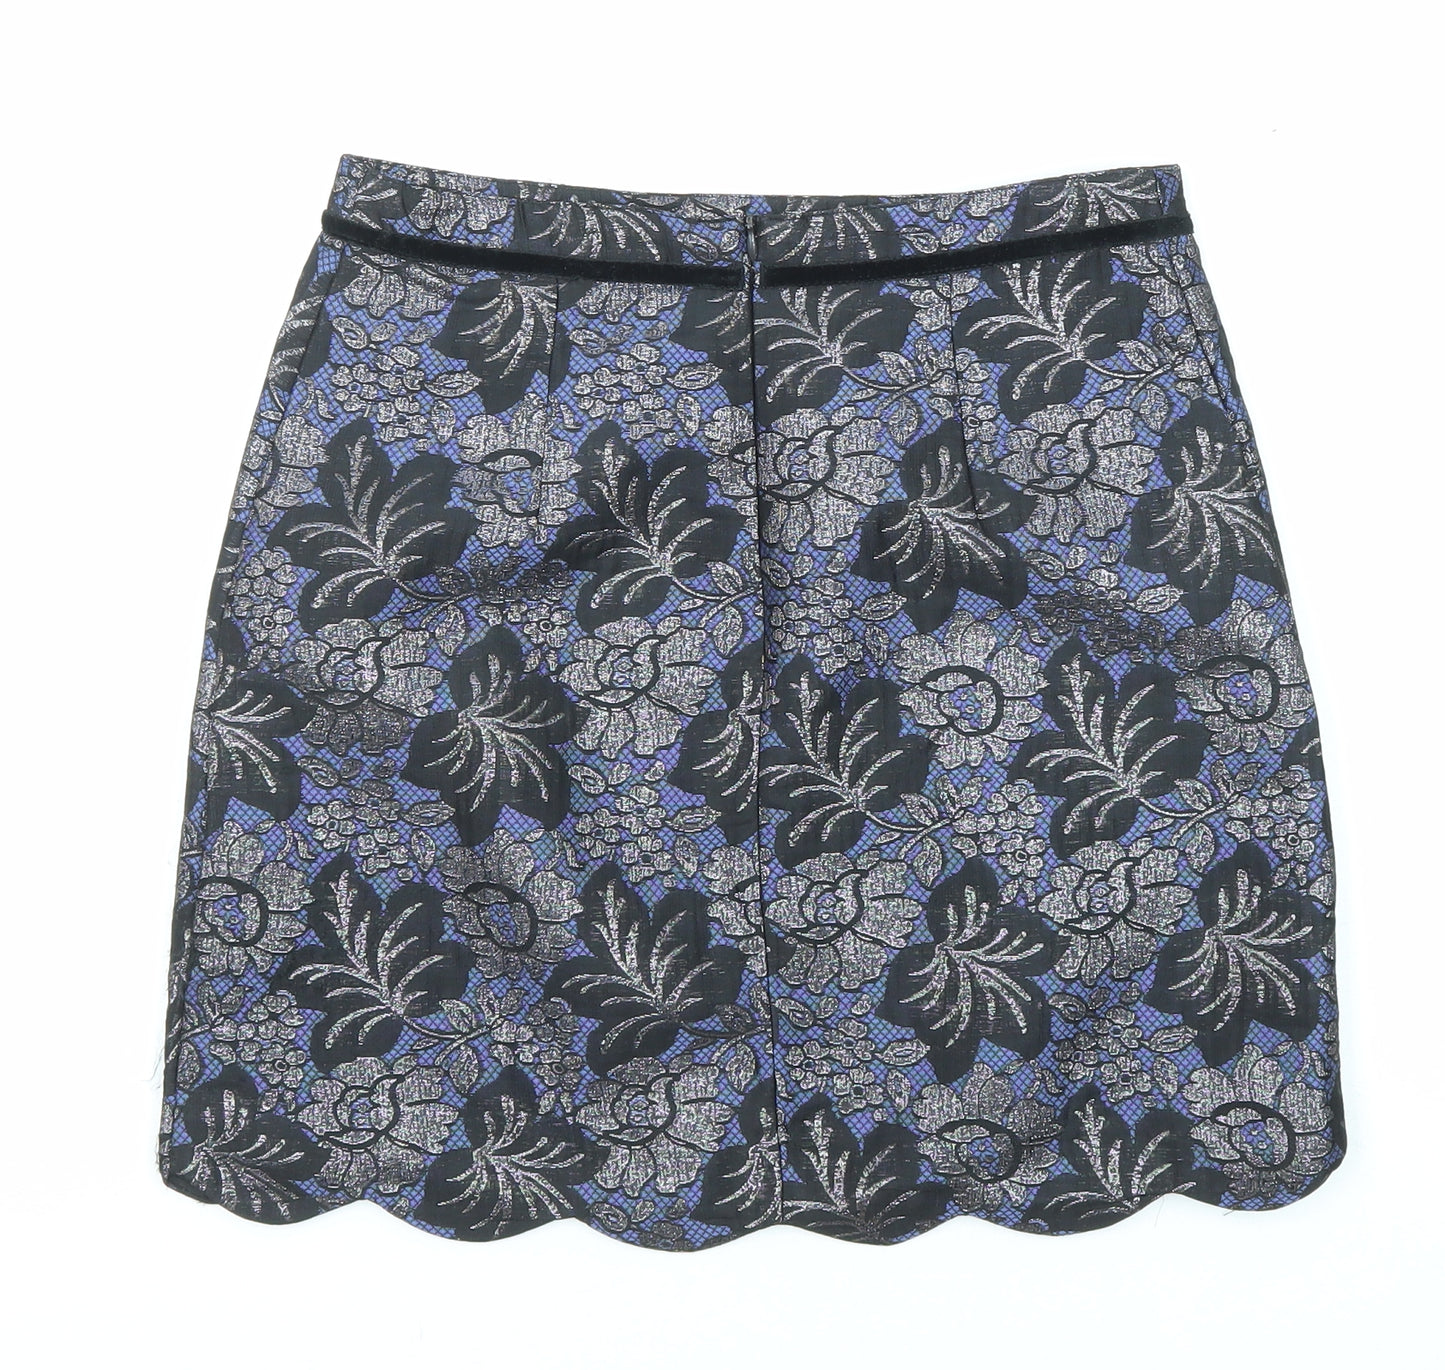 Oasis Womens Multicoloured Floral Polyester A-Line Skirt Size 8 Zip